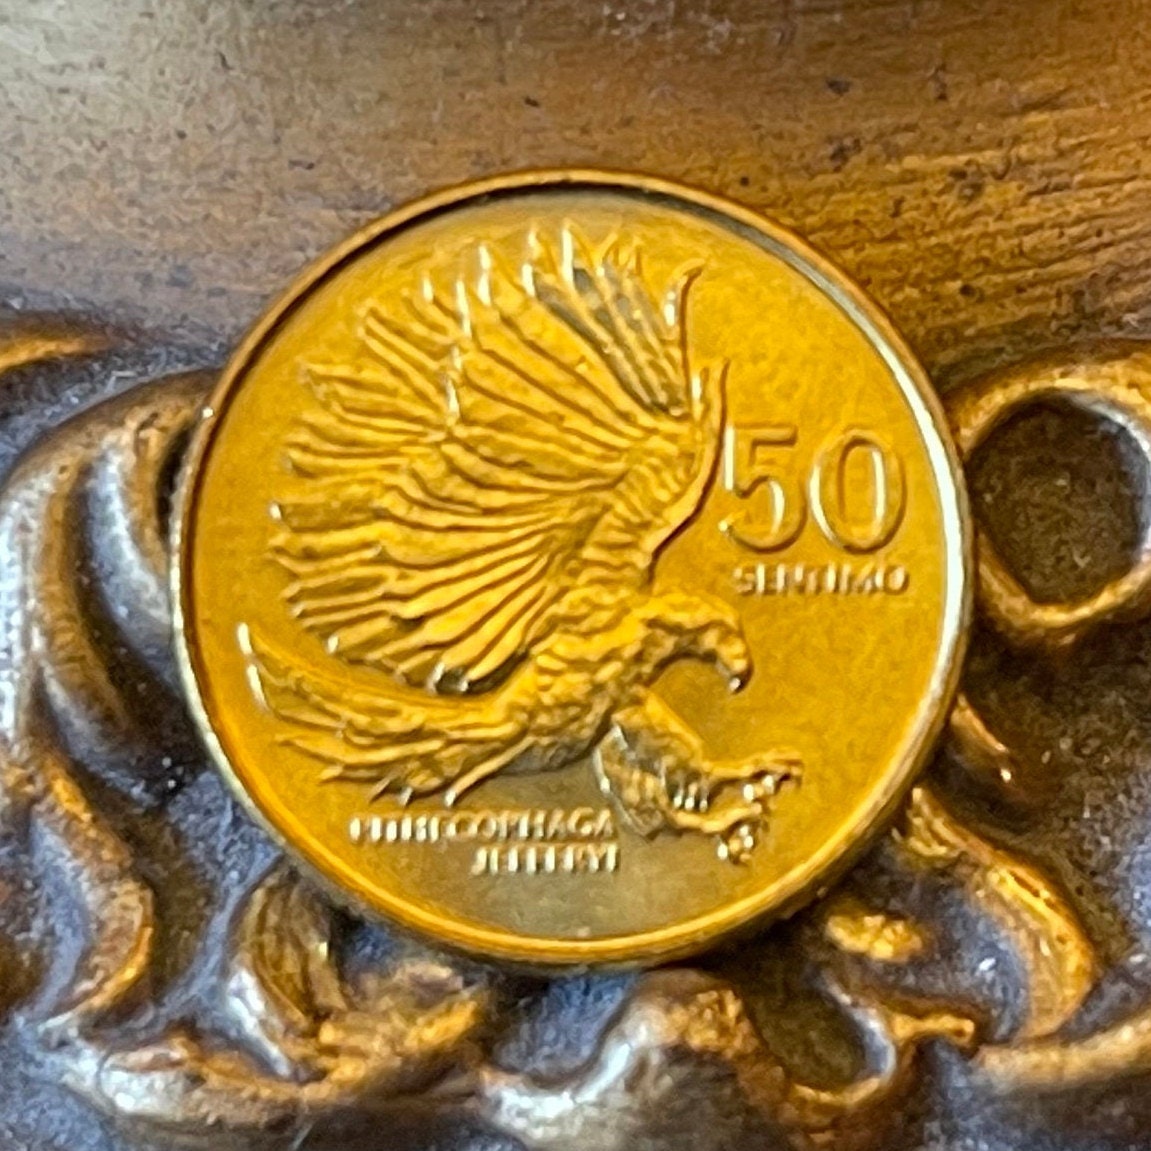 Monkey-Eating Eagle & Plaridel 50 Sentimo Philippines Authentic Coin Money for Jewelry and Craft Making (Marcelo H. del Pilar)